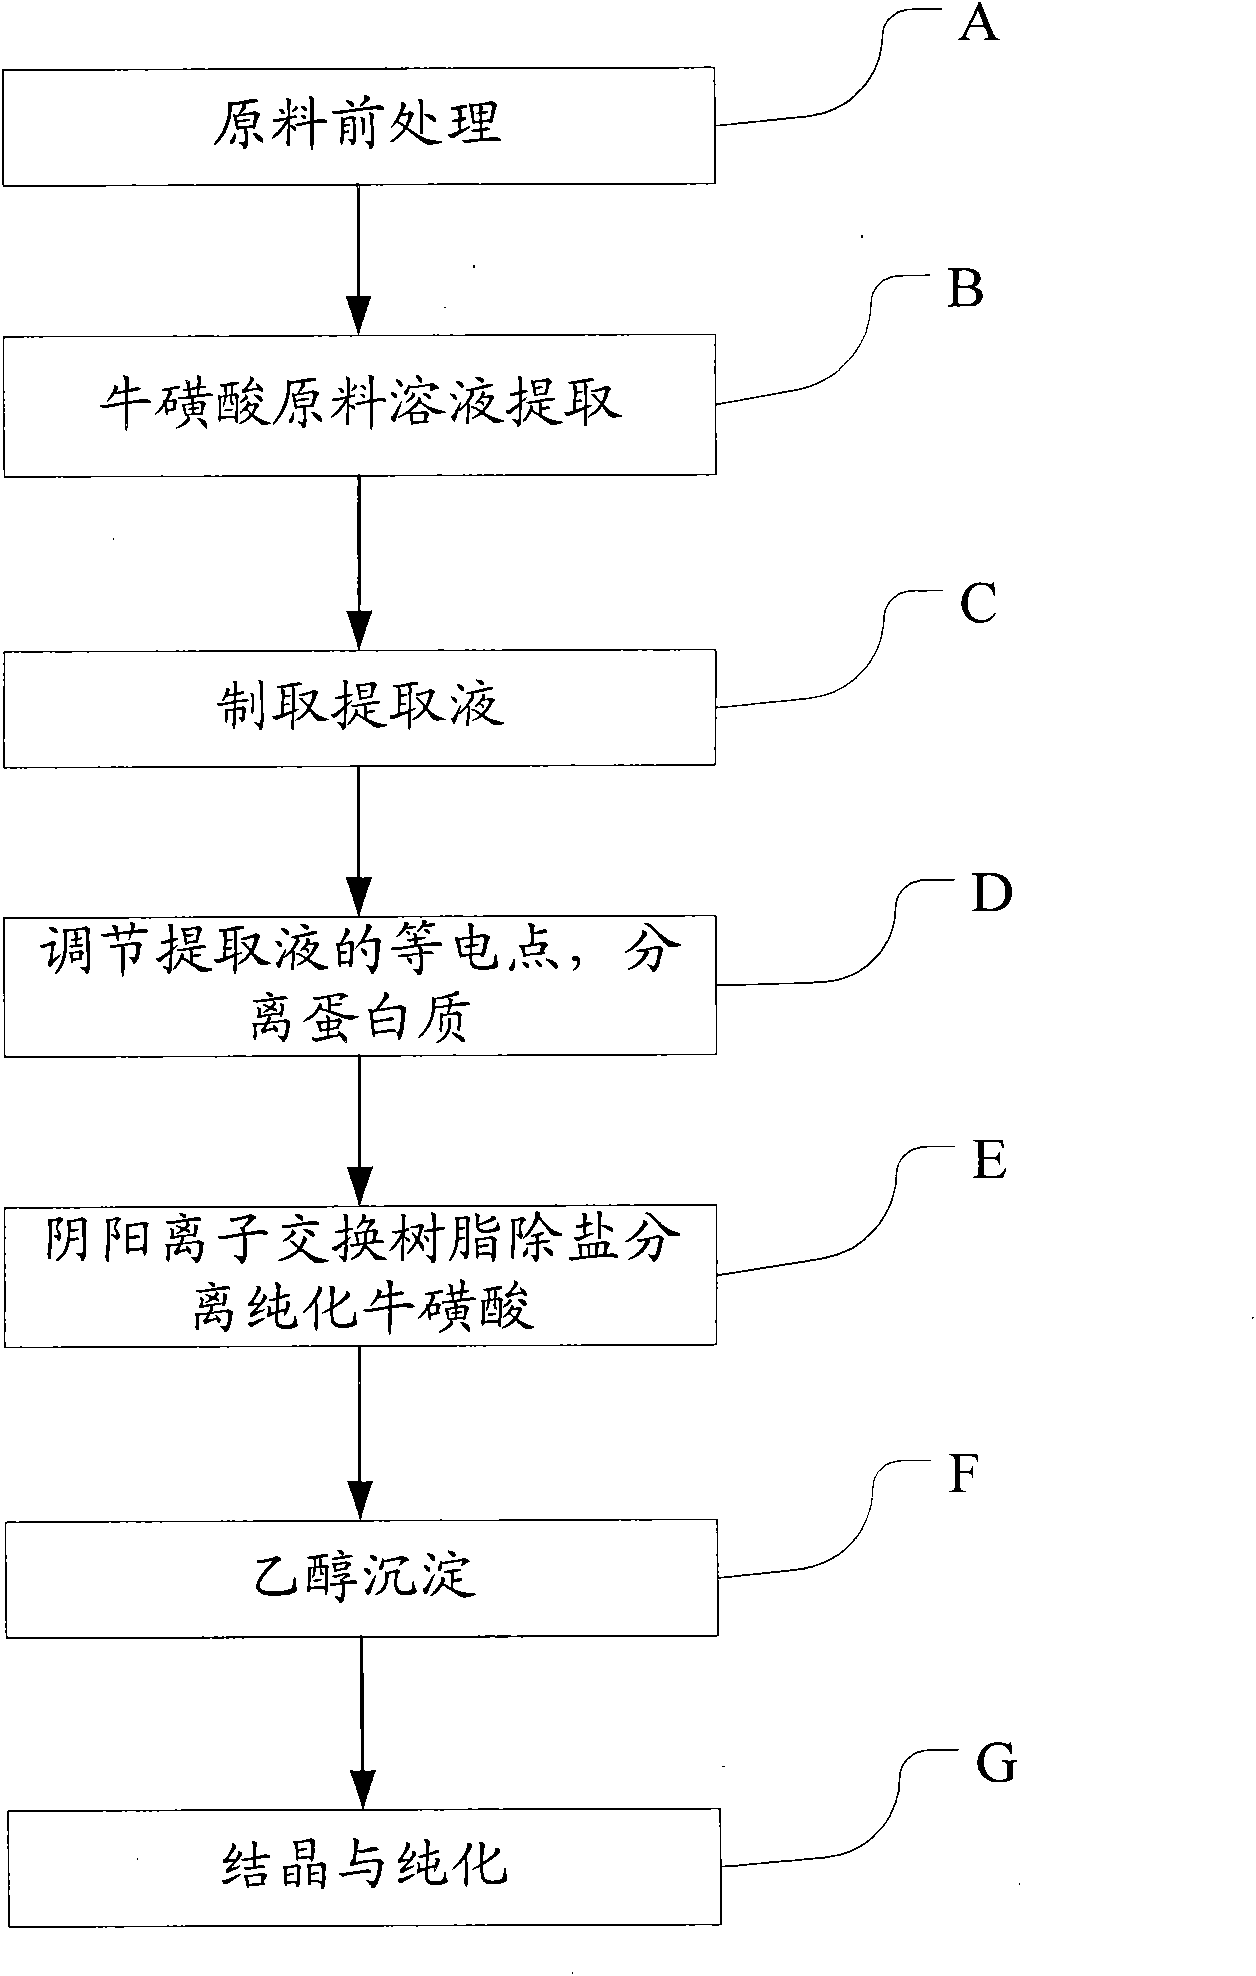 Method for extracting and separating natural taurine from octopus leftovers